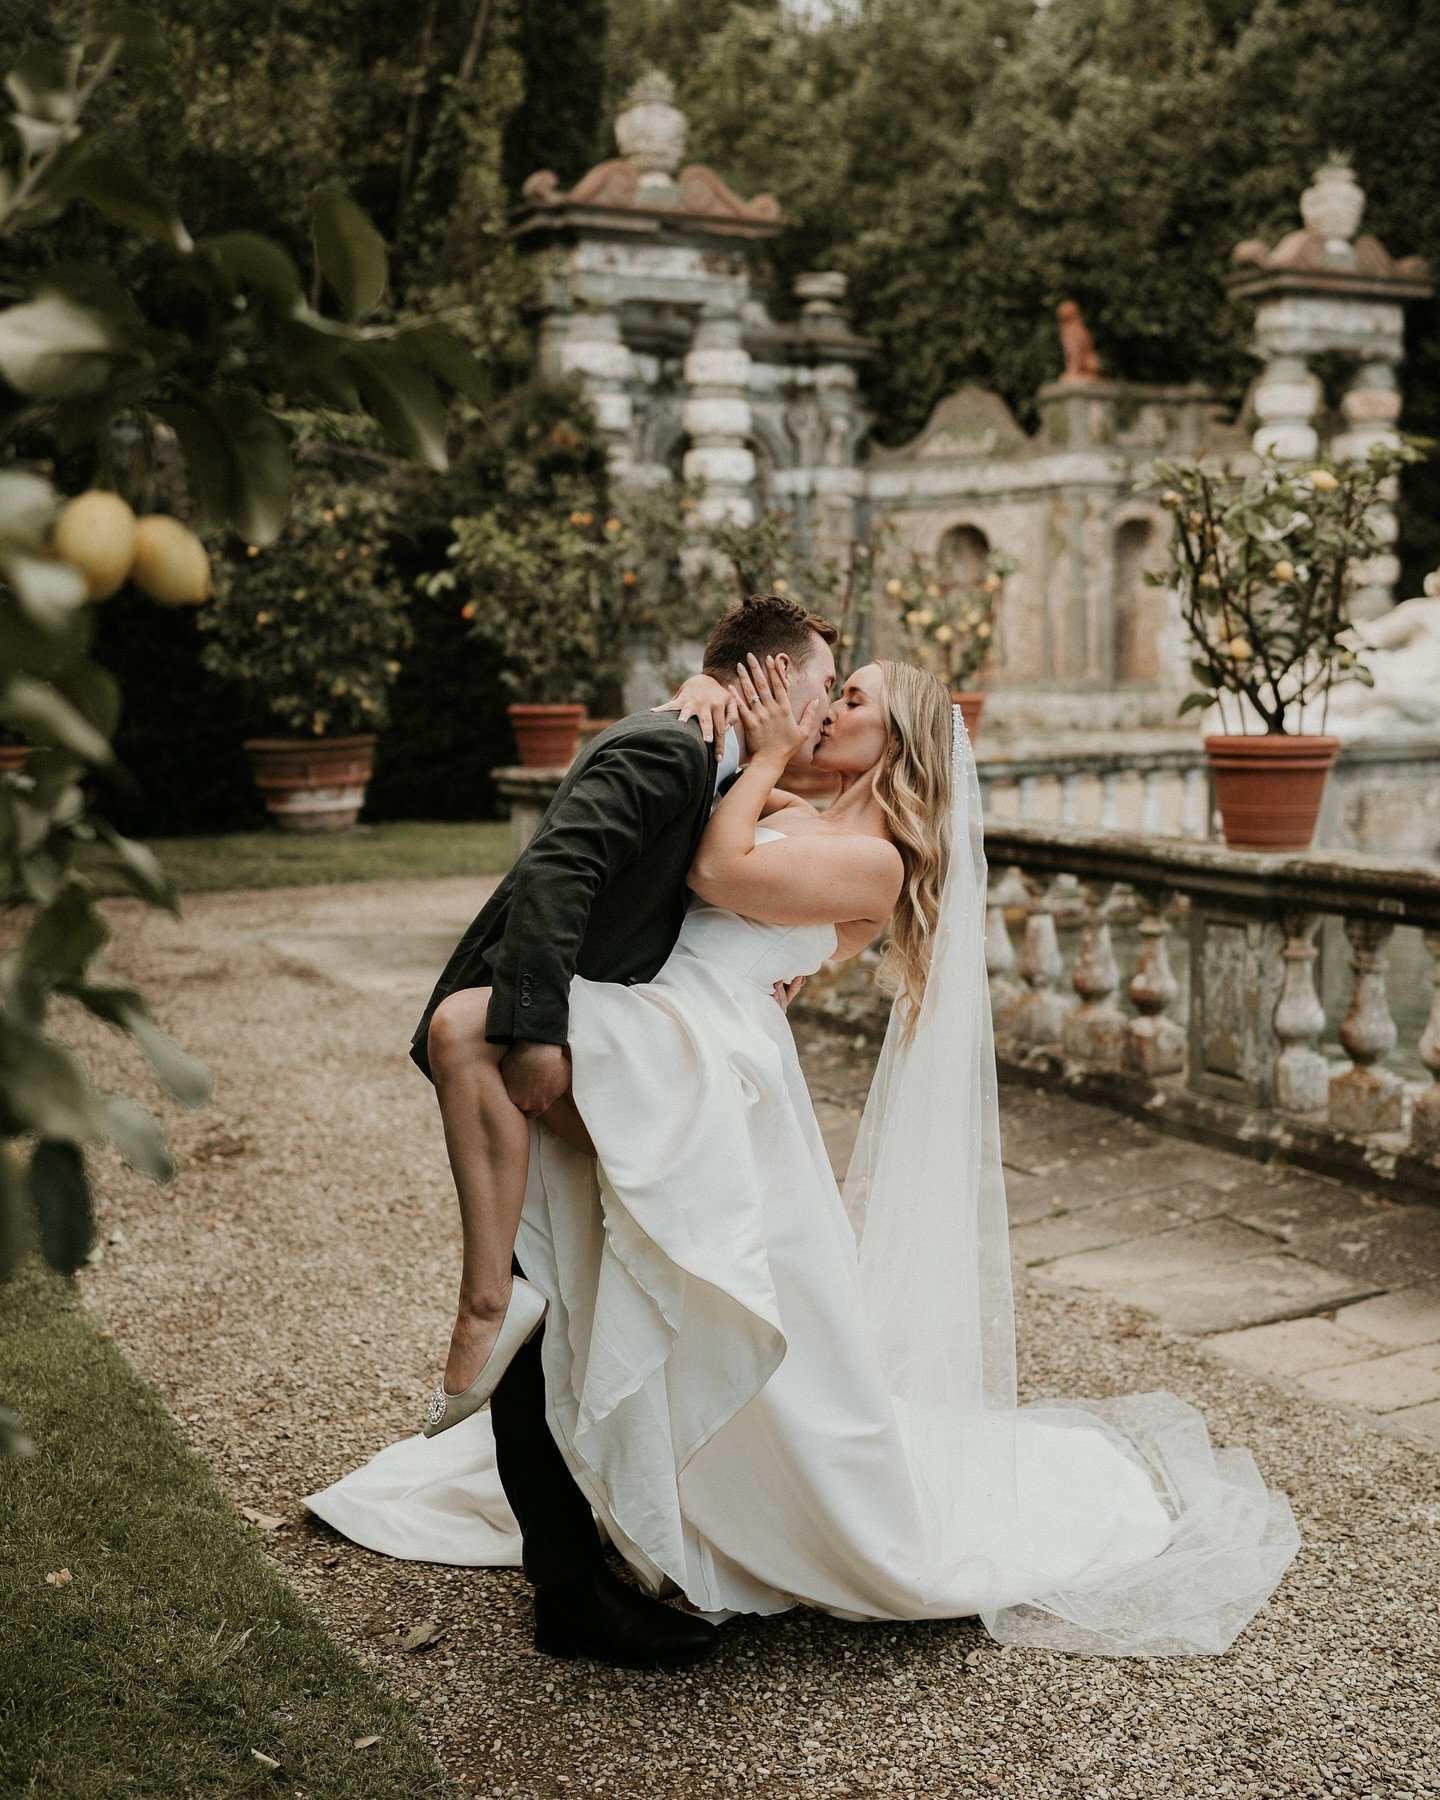 I have so much to share from this incredible intimate wedding in Lucca, Italy. Being part of a wedding day is so magical. But when your couple come from Australia and choose me from the UK, it&rsquo;s incredibly special. Thank you E&amp;A for trustin